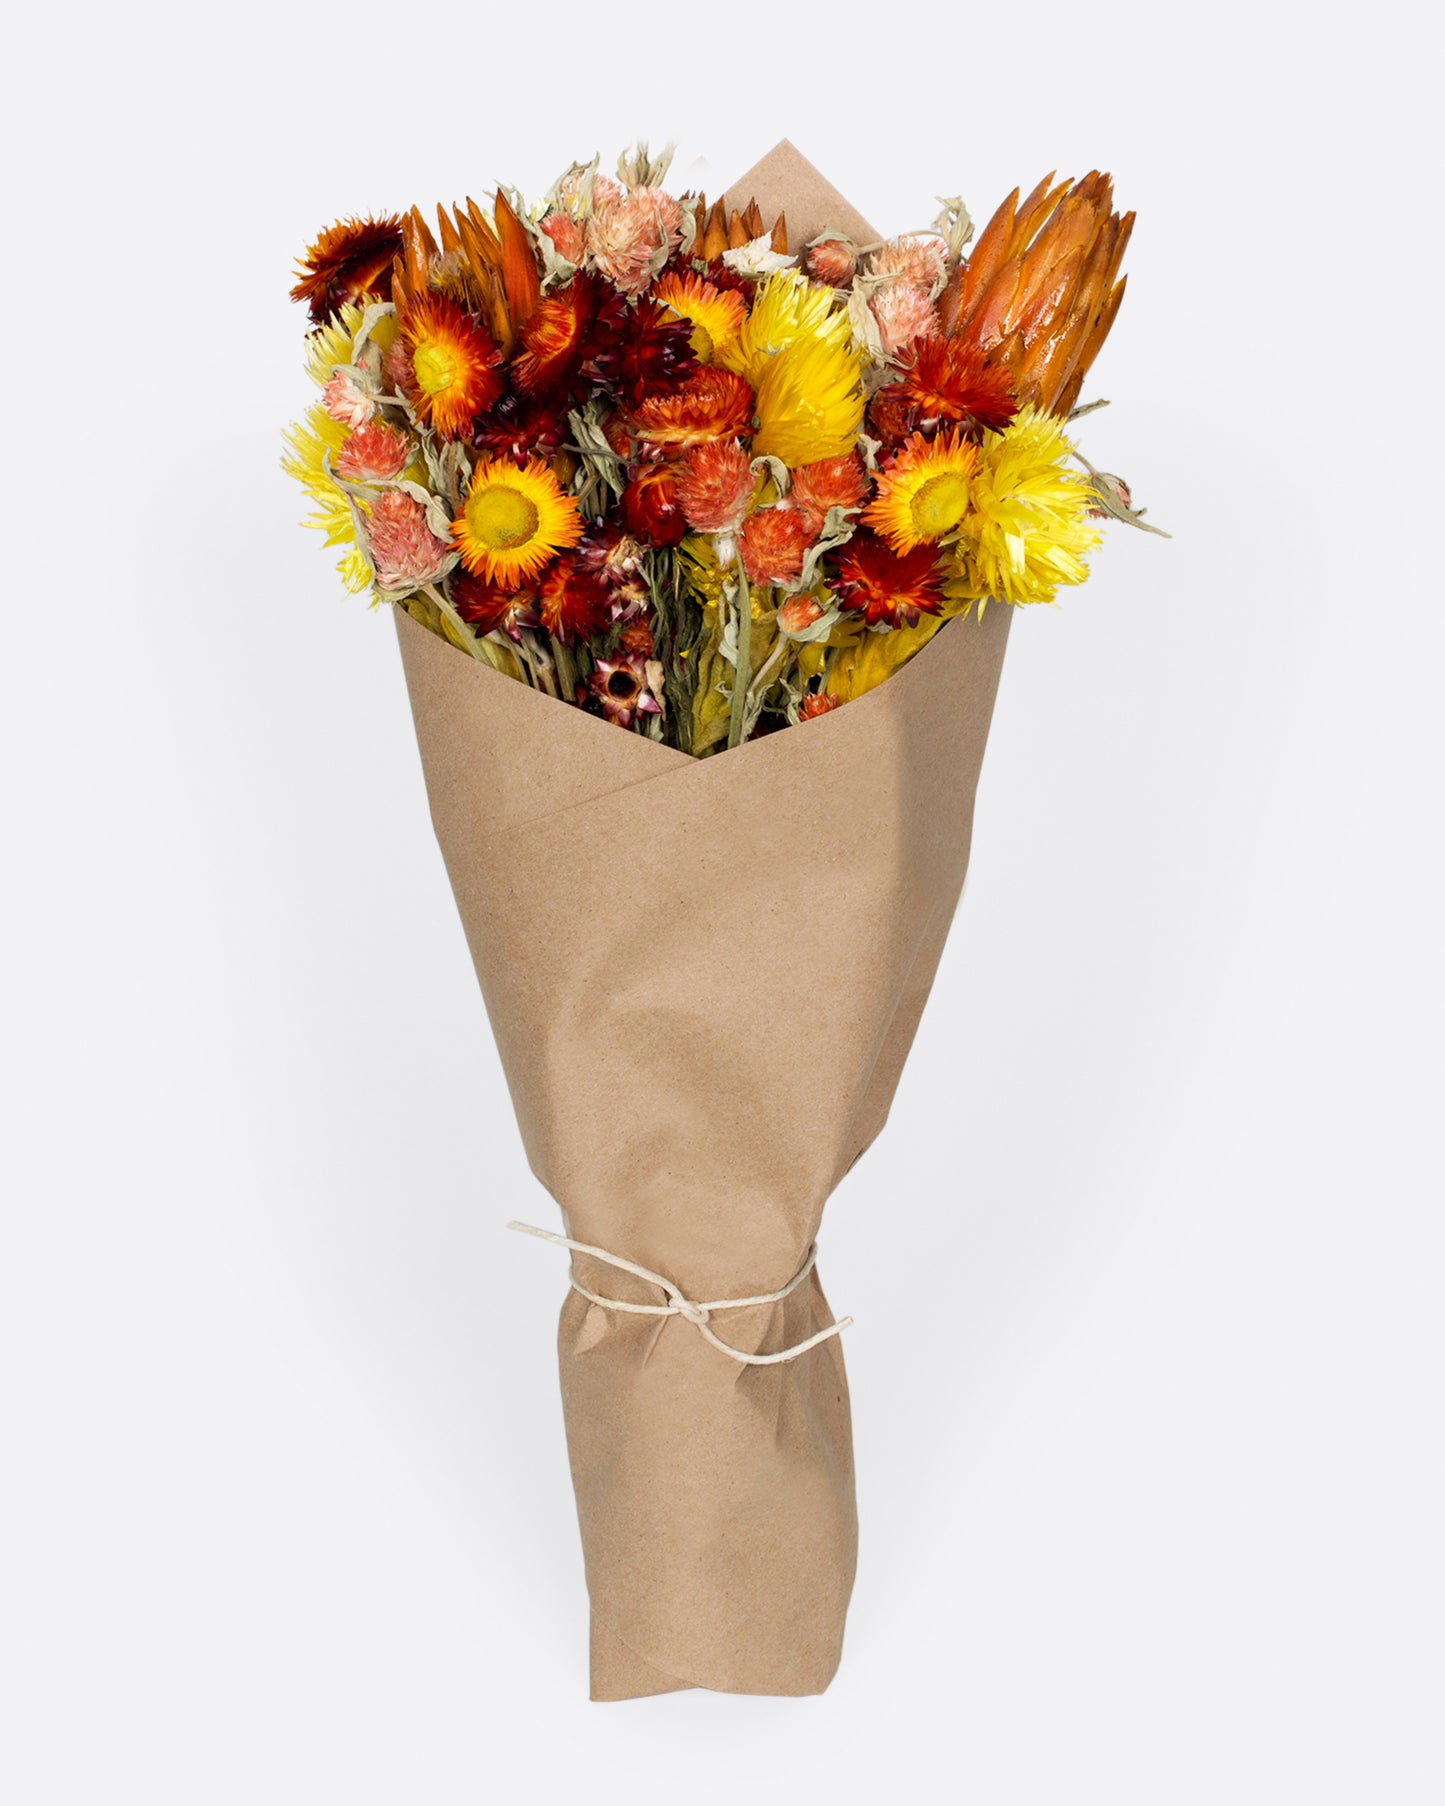 A warm dried floral arrangement of reds and yellows.